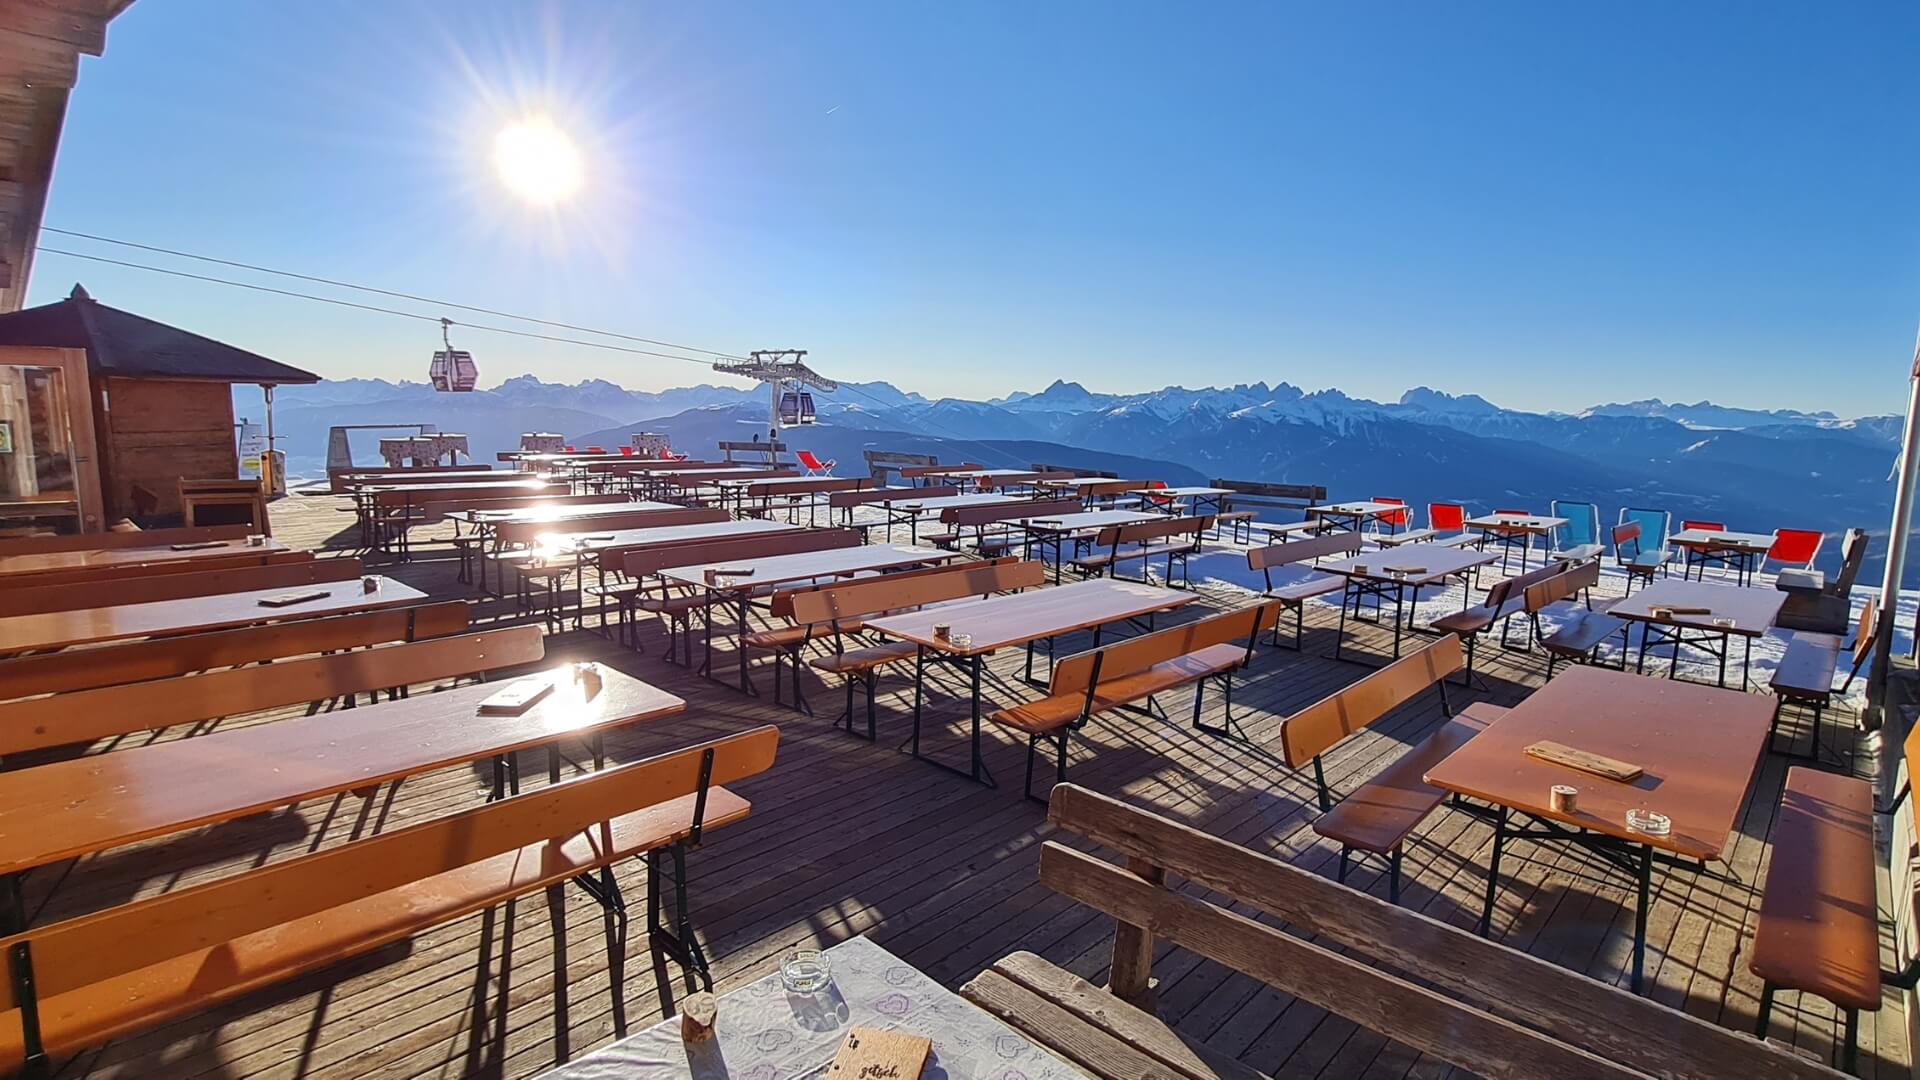 On the terrace of the Gitschhütte you can enjoy the panoramic view on the wide beer garden table set with backrest.